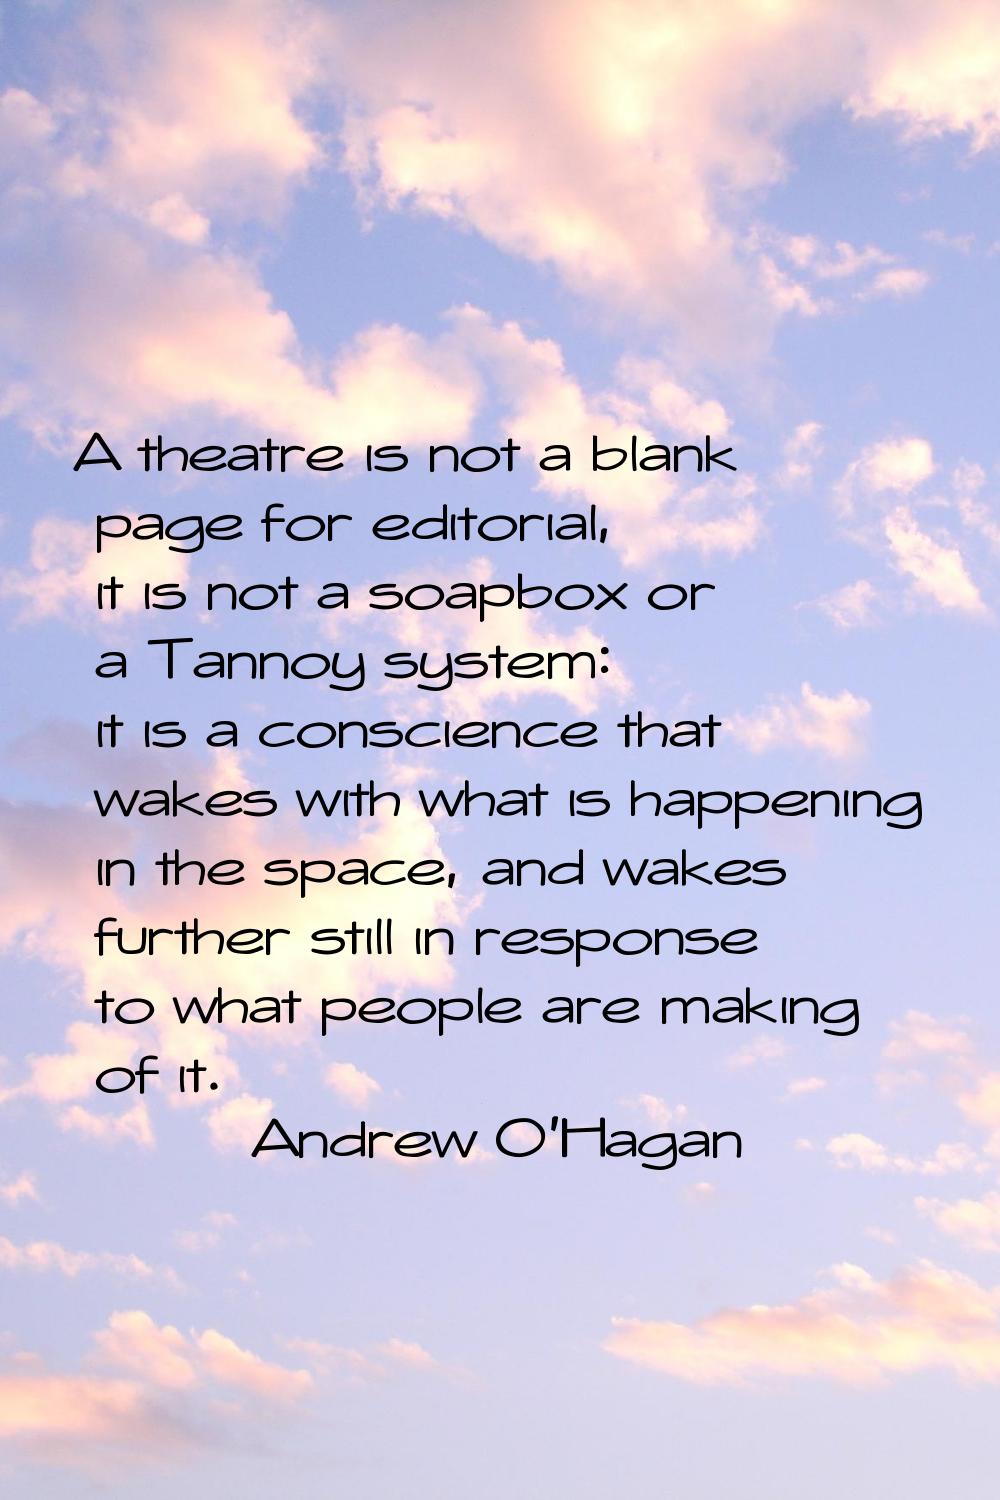 A theatre is not a blank page for editorial, it is not a soapbox or a Tannoy system: it is a consci